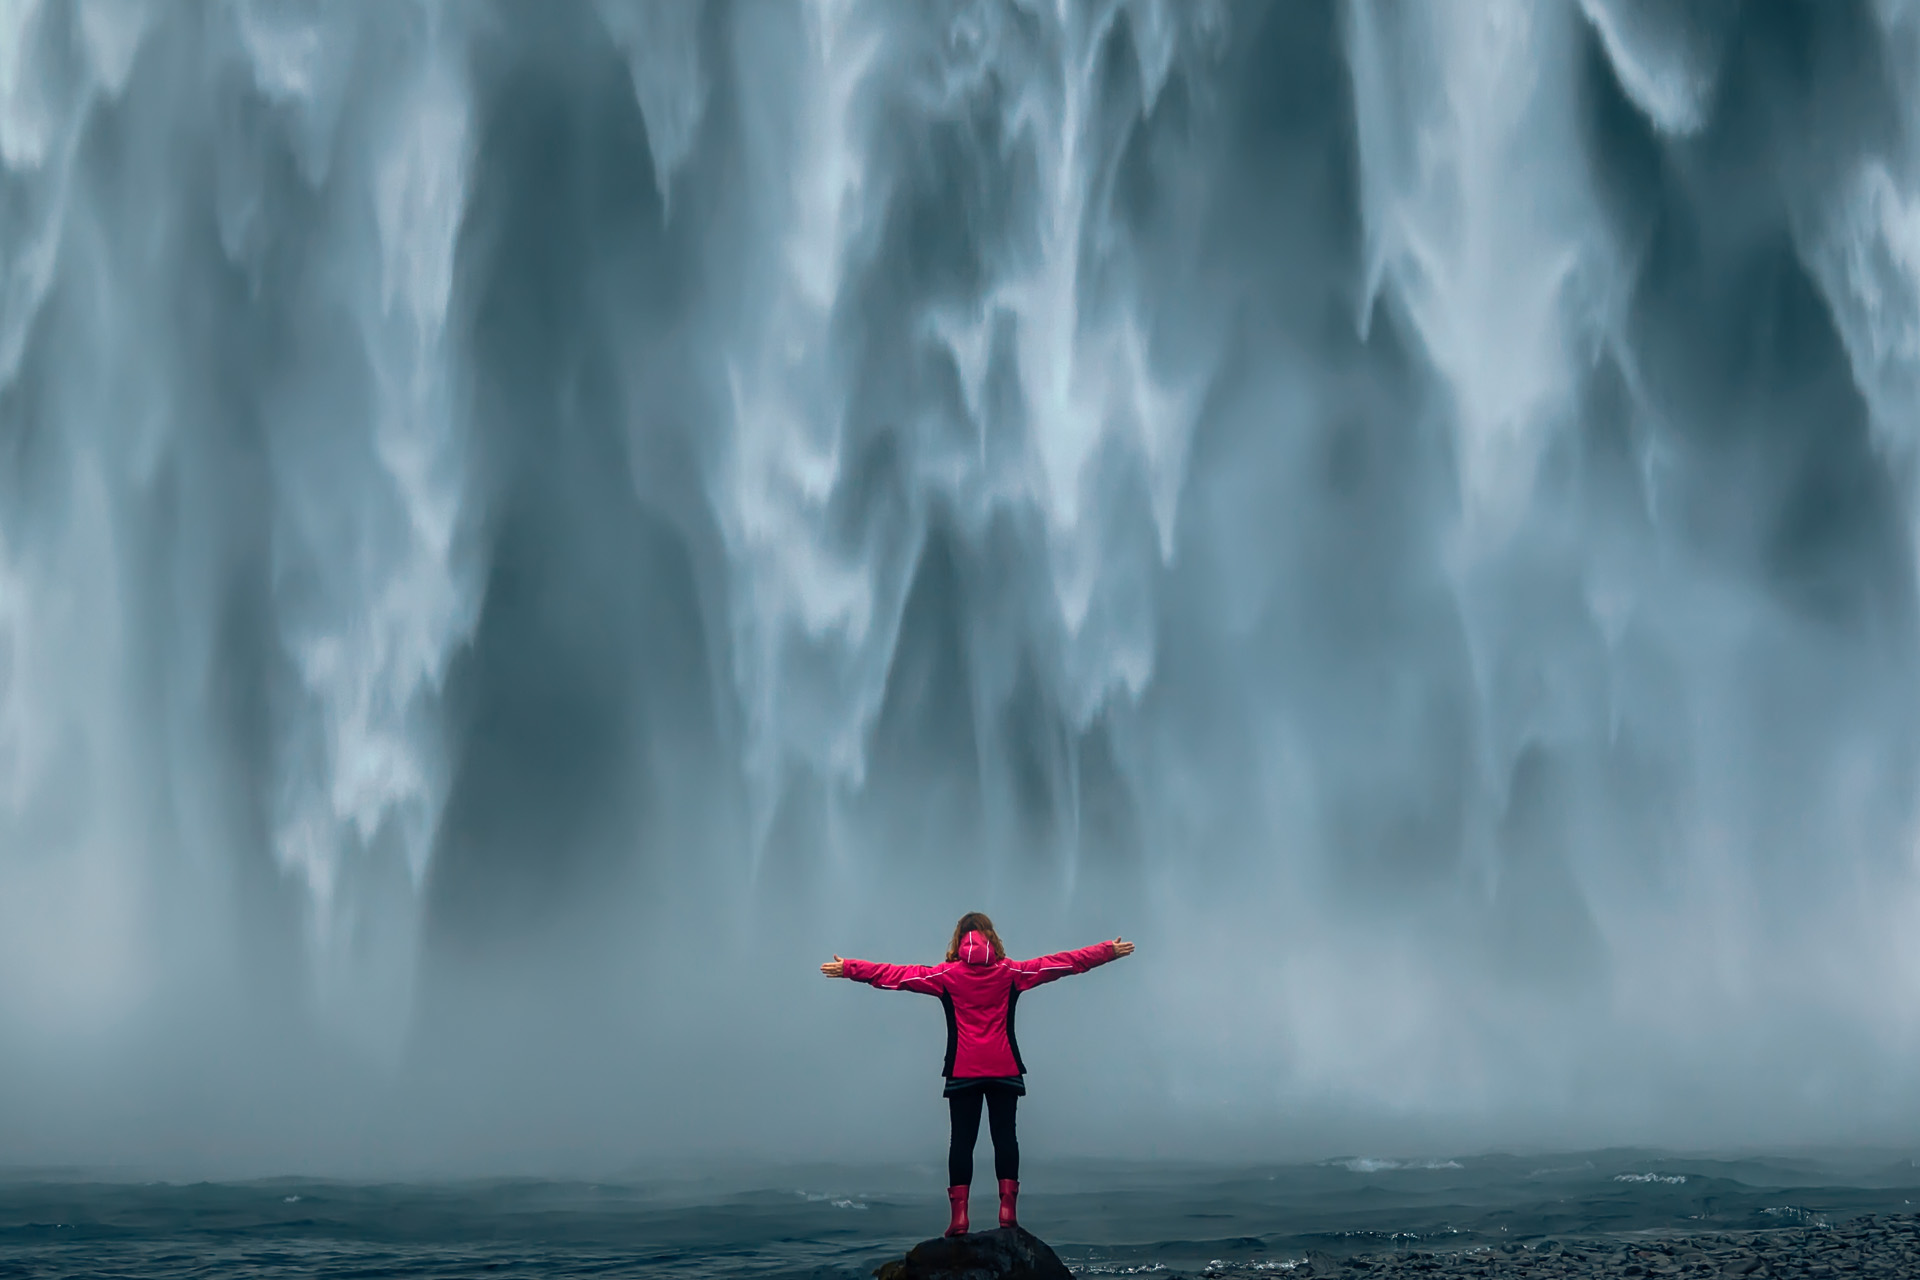 Instagram's Favourite Waterfalls: 10 Stunning Sights To Fall In Love With